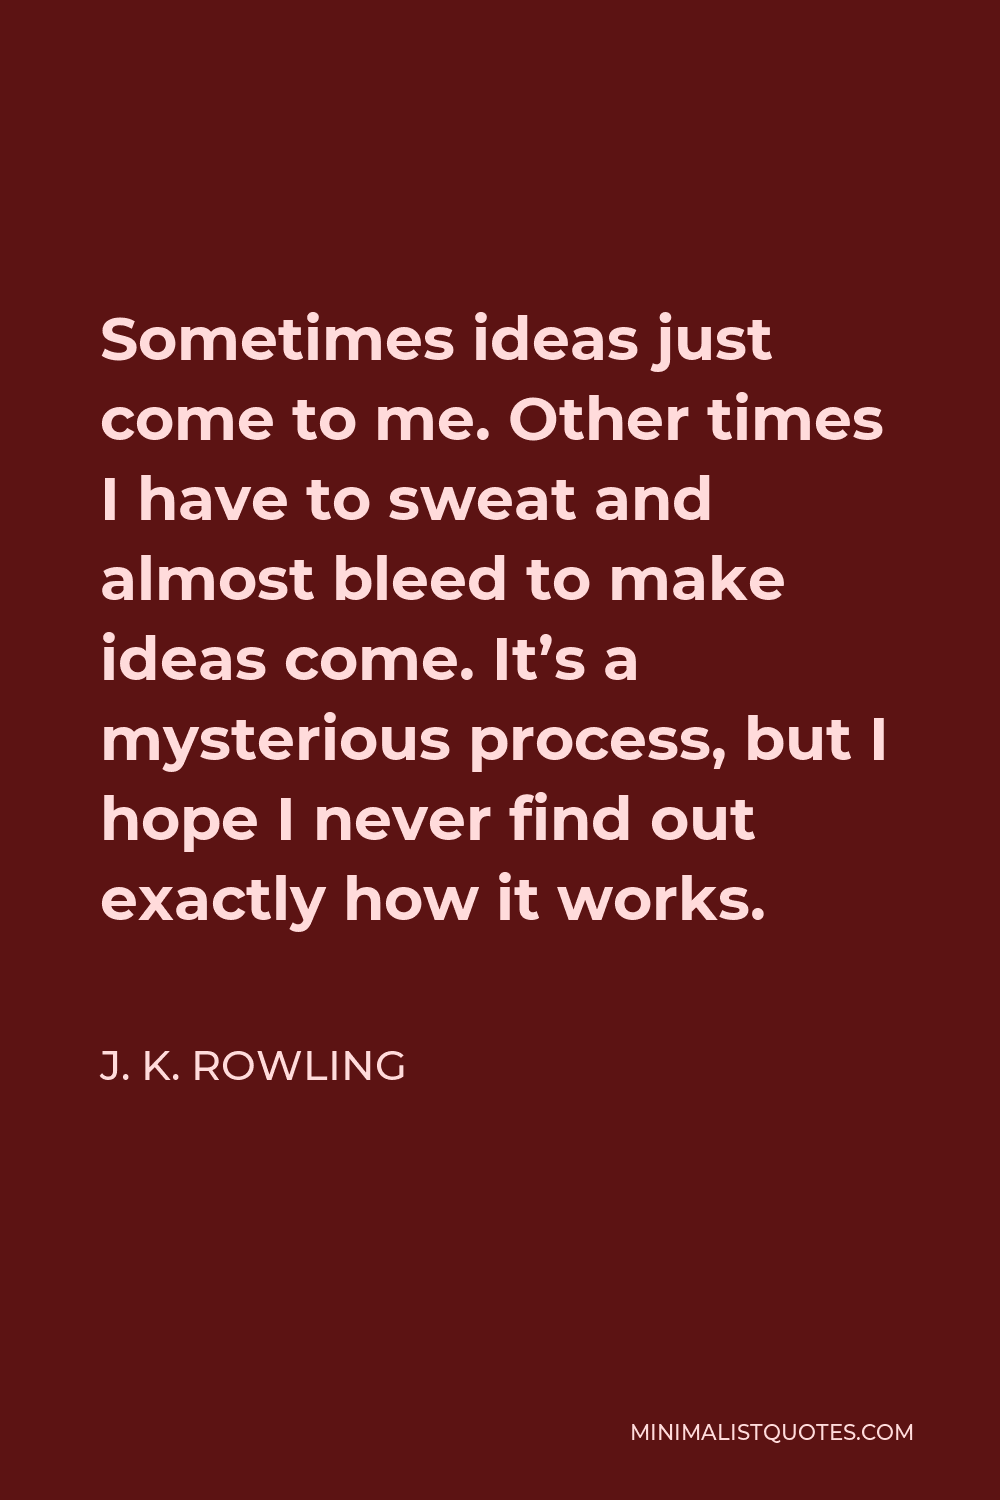 J. K. Rowling Quote - Sometimes ideas just come to me. Other times I have to sweat and almost bleed to make ideas come. It’s a mysterious process, but I hope I never find out exactly how it works.